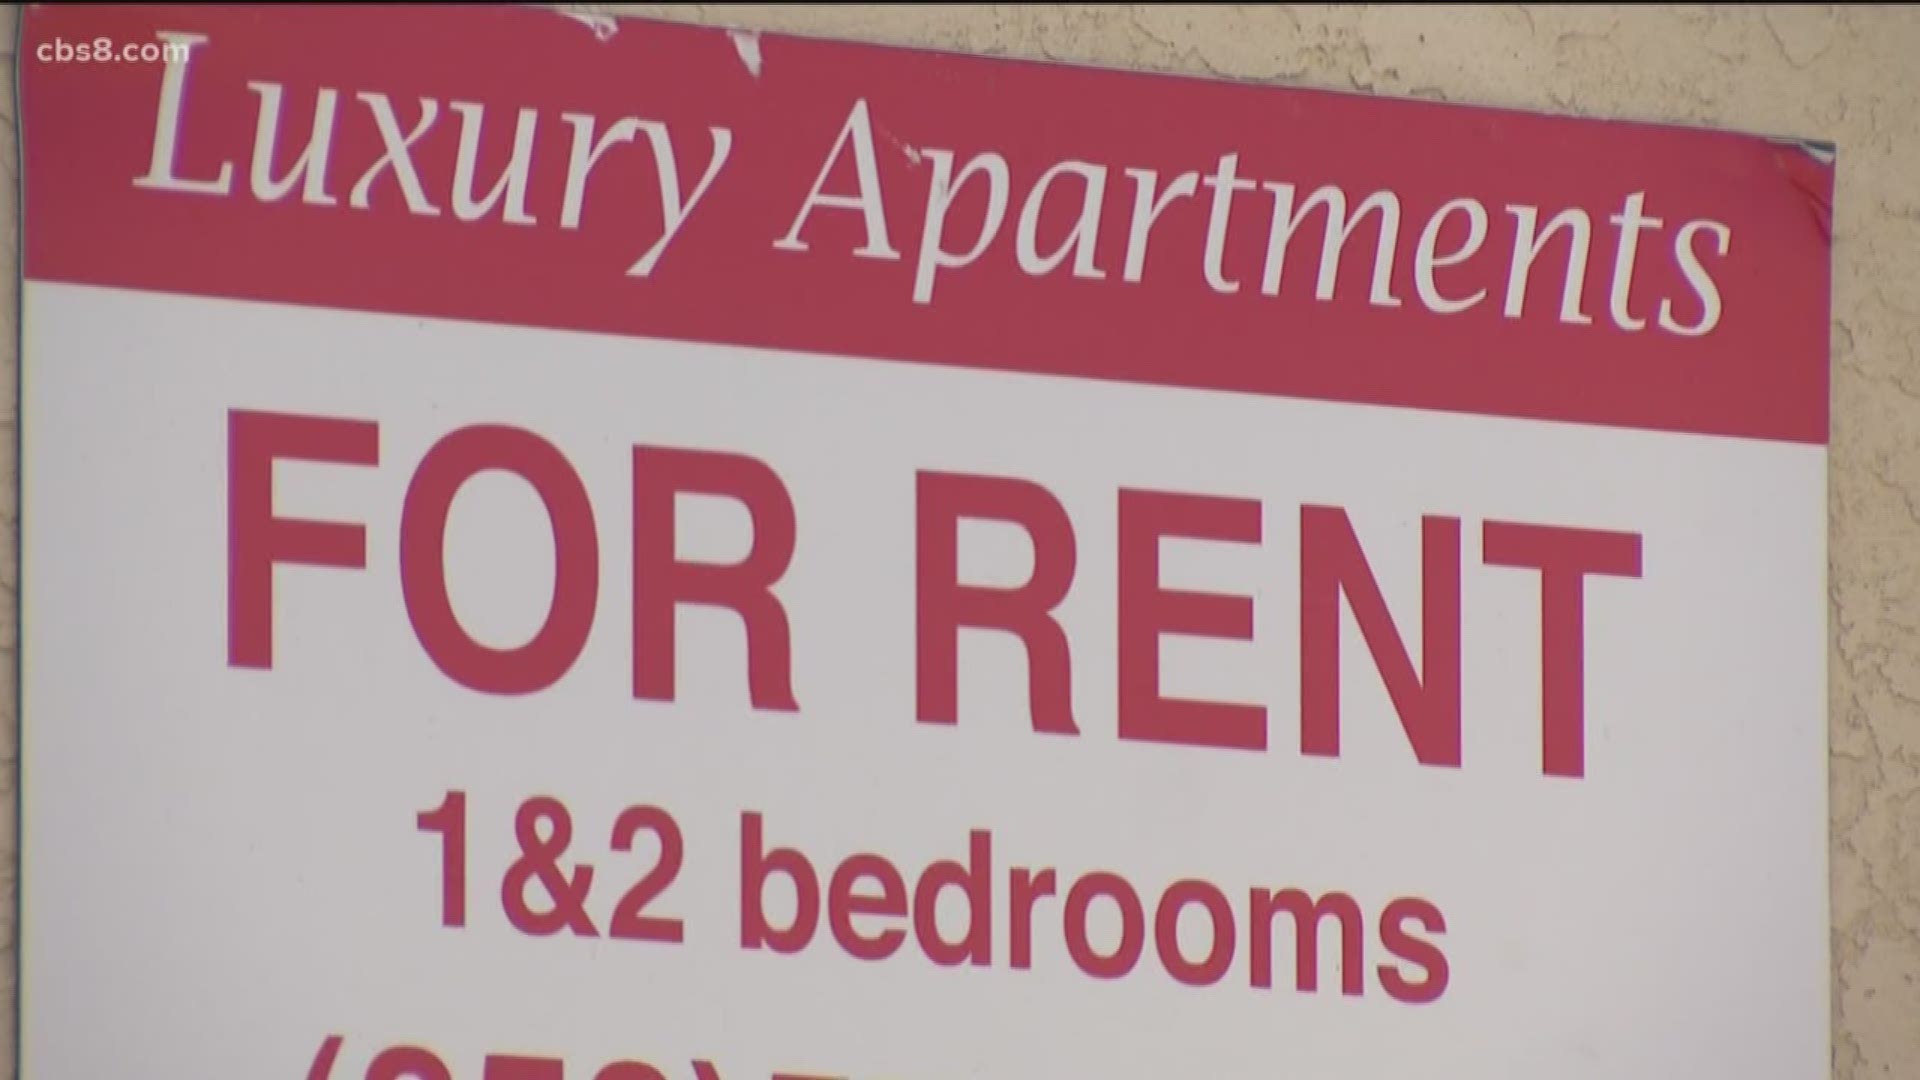 The law officially takes effect Jan. 1, 2020, but some landlords have already sent increase notices that break the rules.